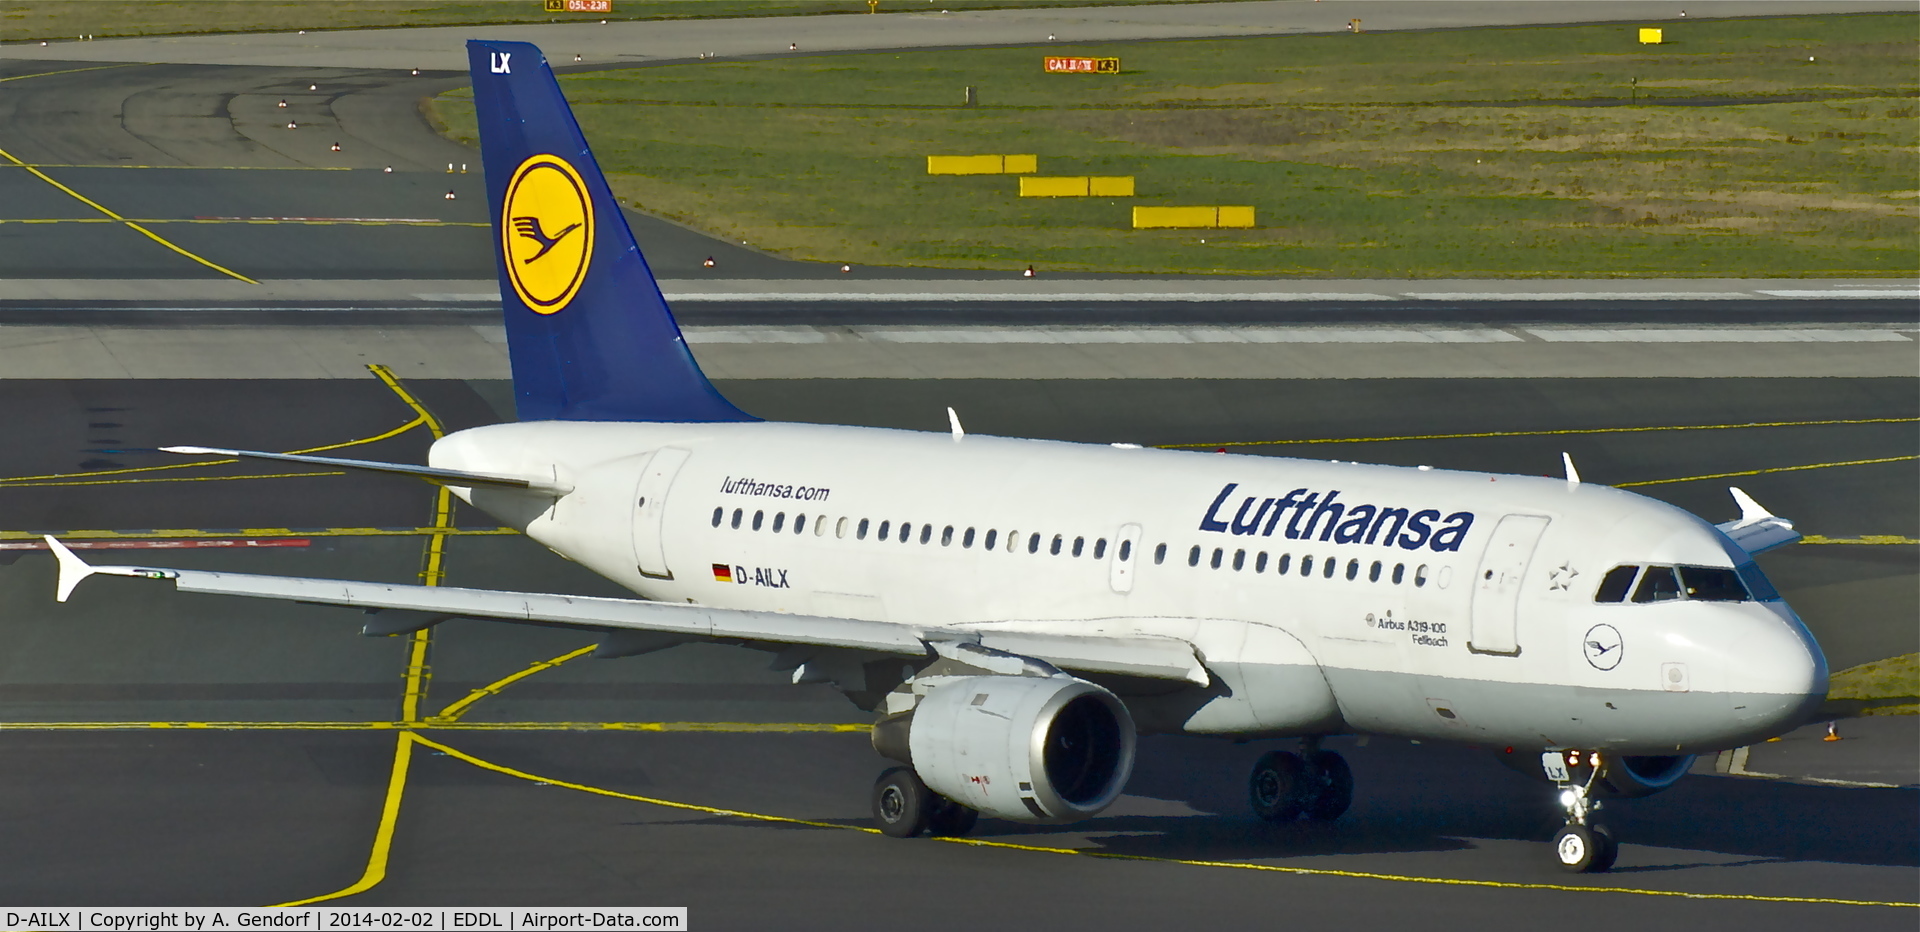 D-AILX, 1998 Airbus A319-114 C/N 860, Lufthansa, is here shortly after landing at Düsseldorf Int'l(EDDL)